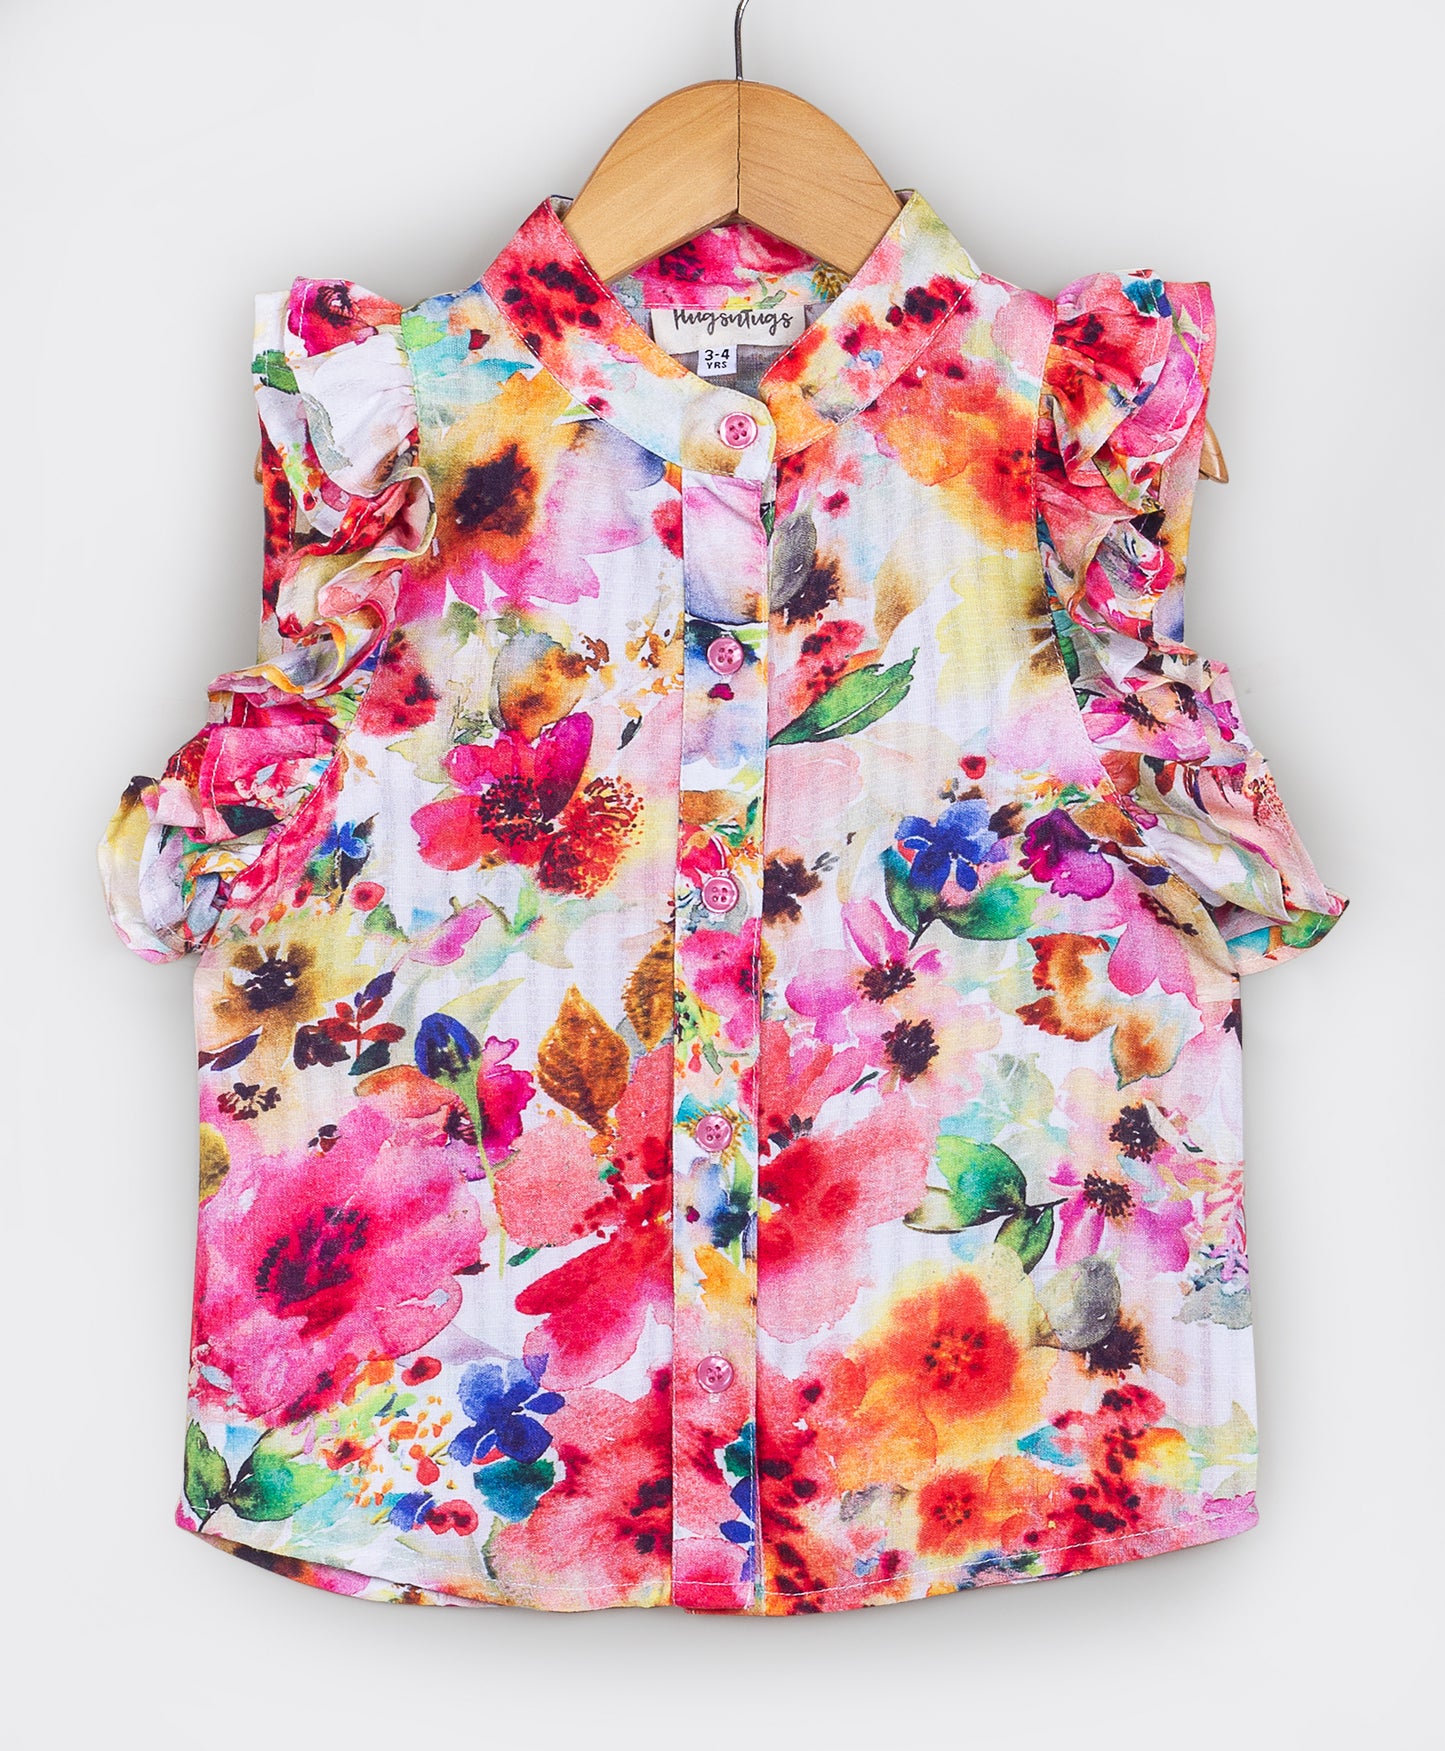 Water color effect floral print top